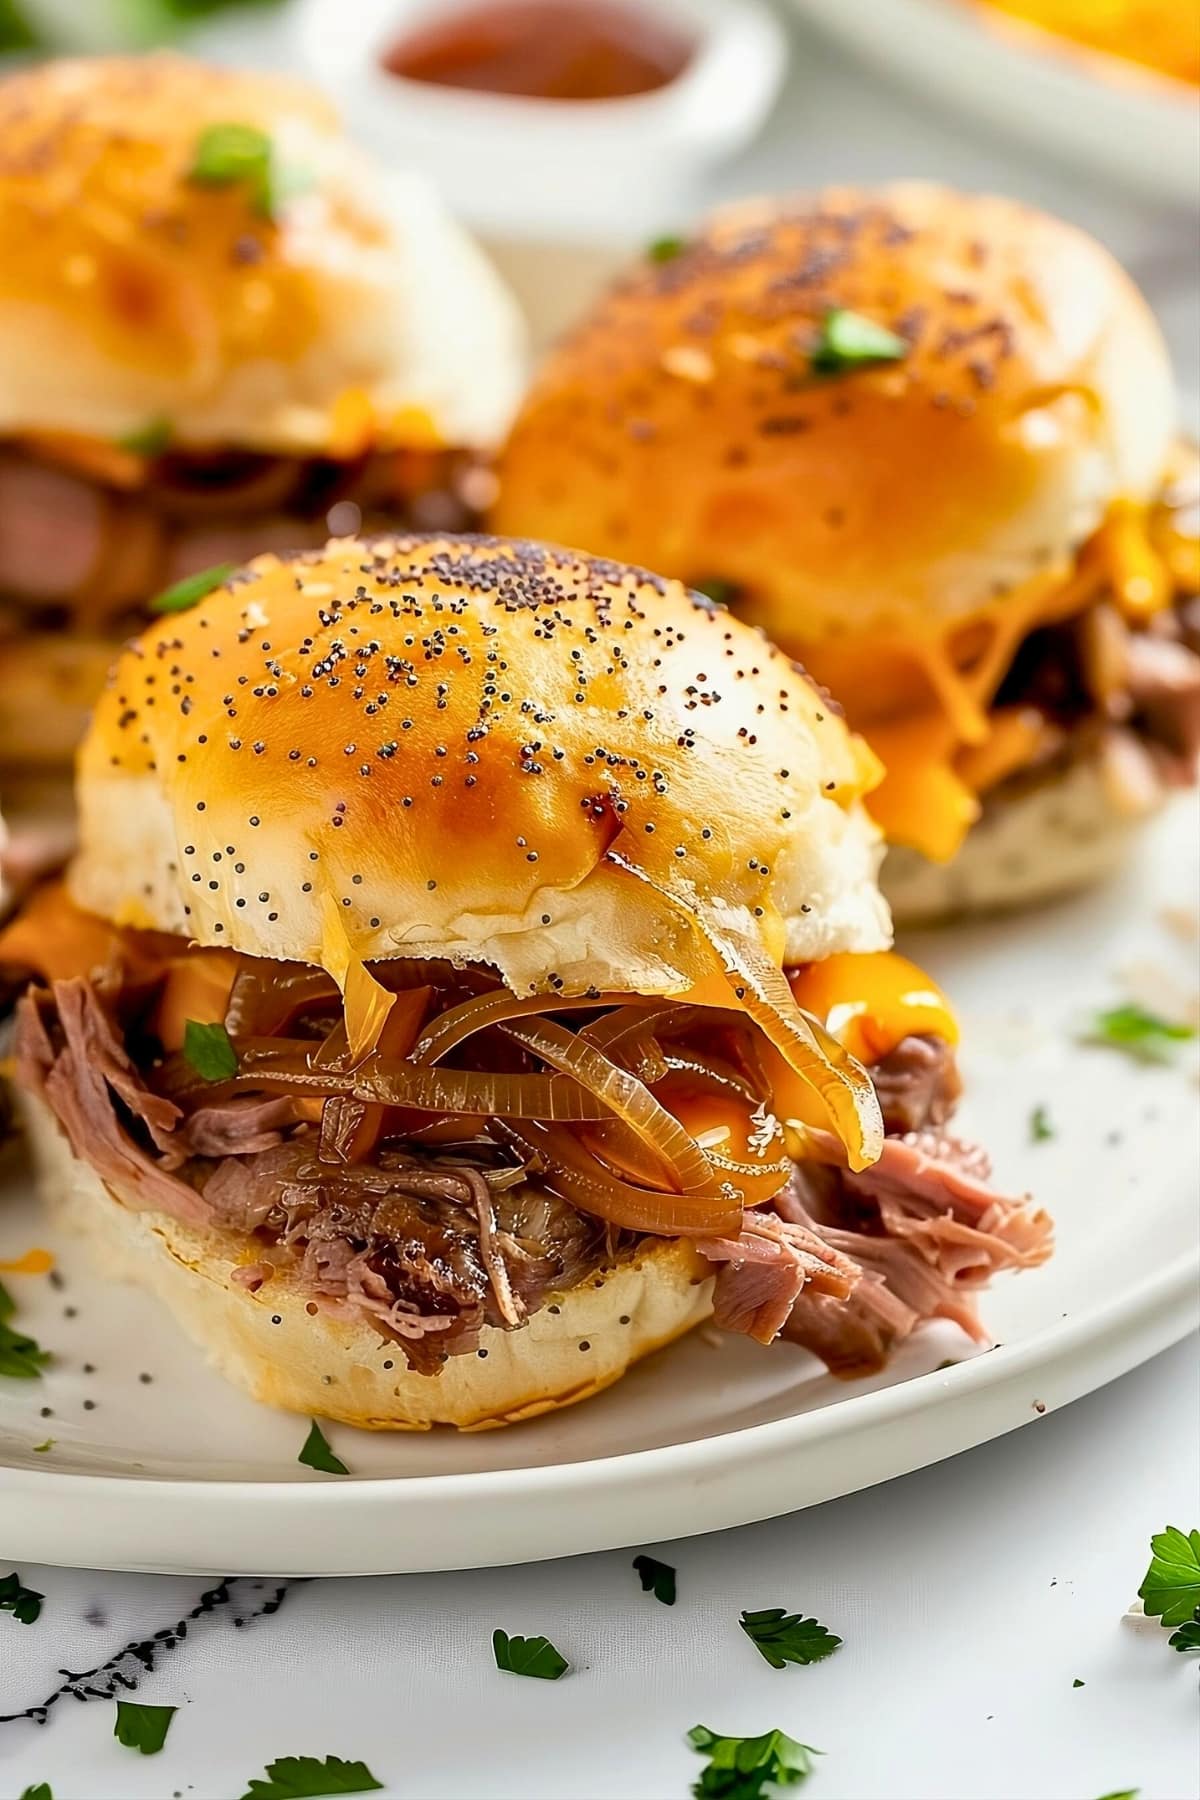 Slider buns with roasted beef and cheese filling.